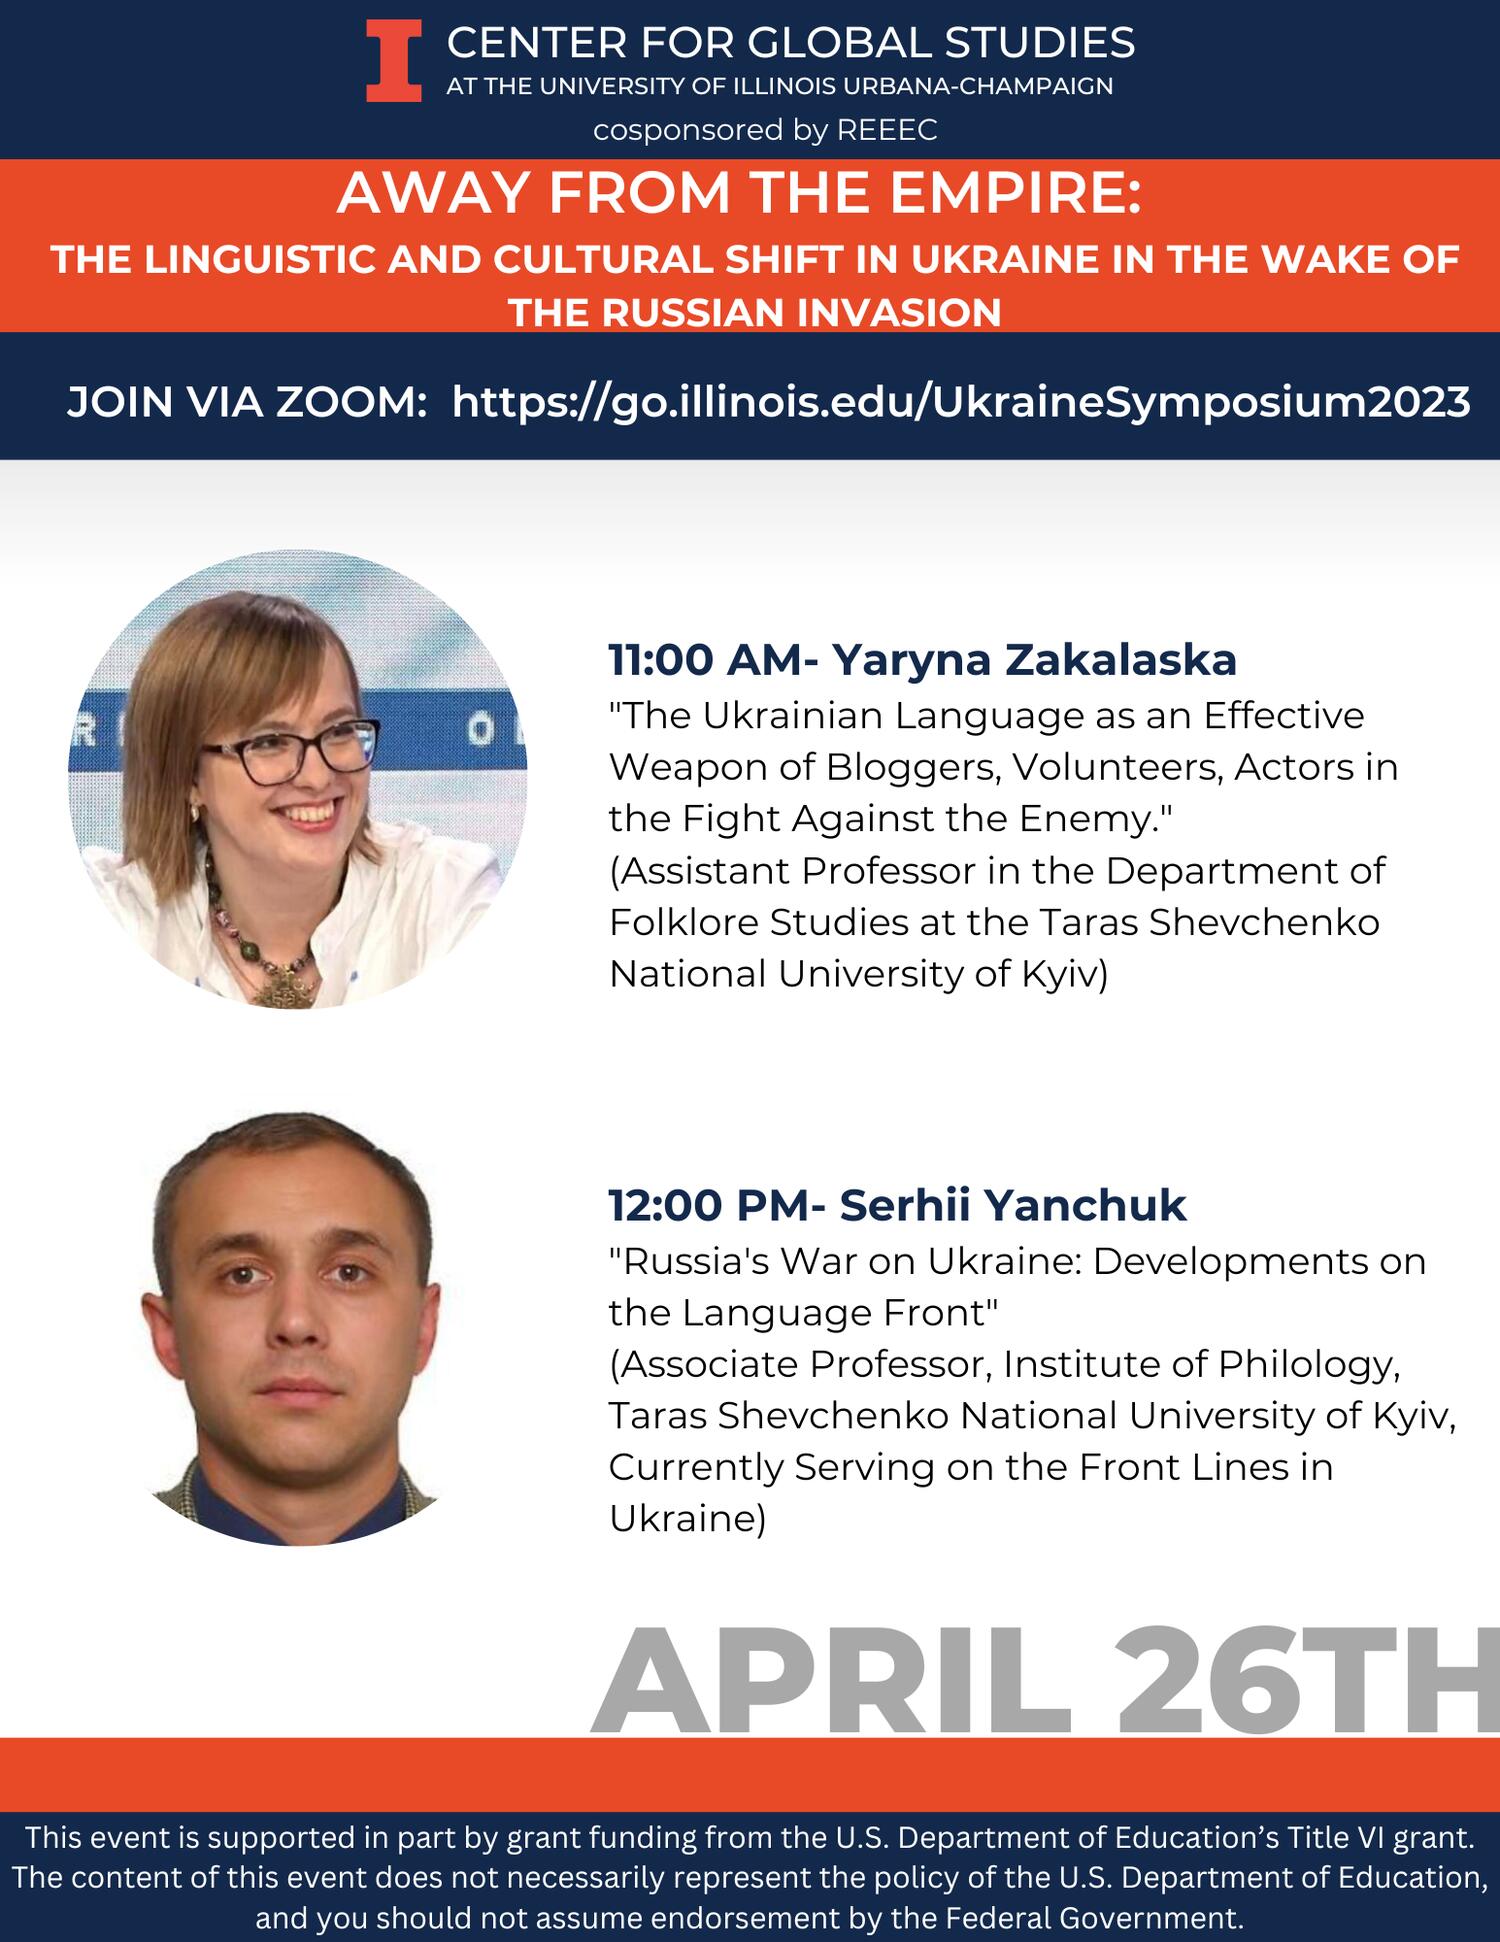 Day three, April 2  At 11:00 AM, “The Ukrainian Language as an Effective Weapon of Bloggers, Volunteers, Actors in the Fight Against the Enemy." Presented by Yaryna Zakalaska. At 12:00 PM, “Russia's War on Ukraine: Developments on the Language Front that is presented by Serhii Yanchuk. 